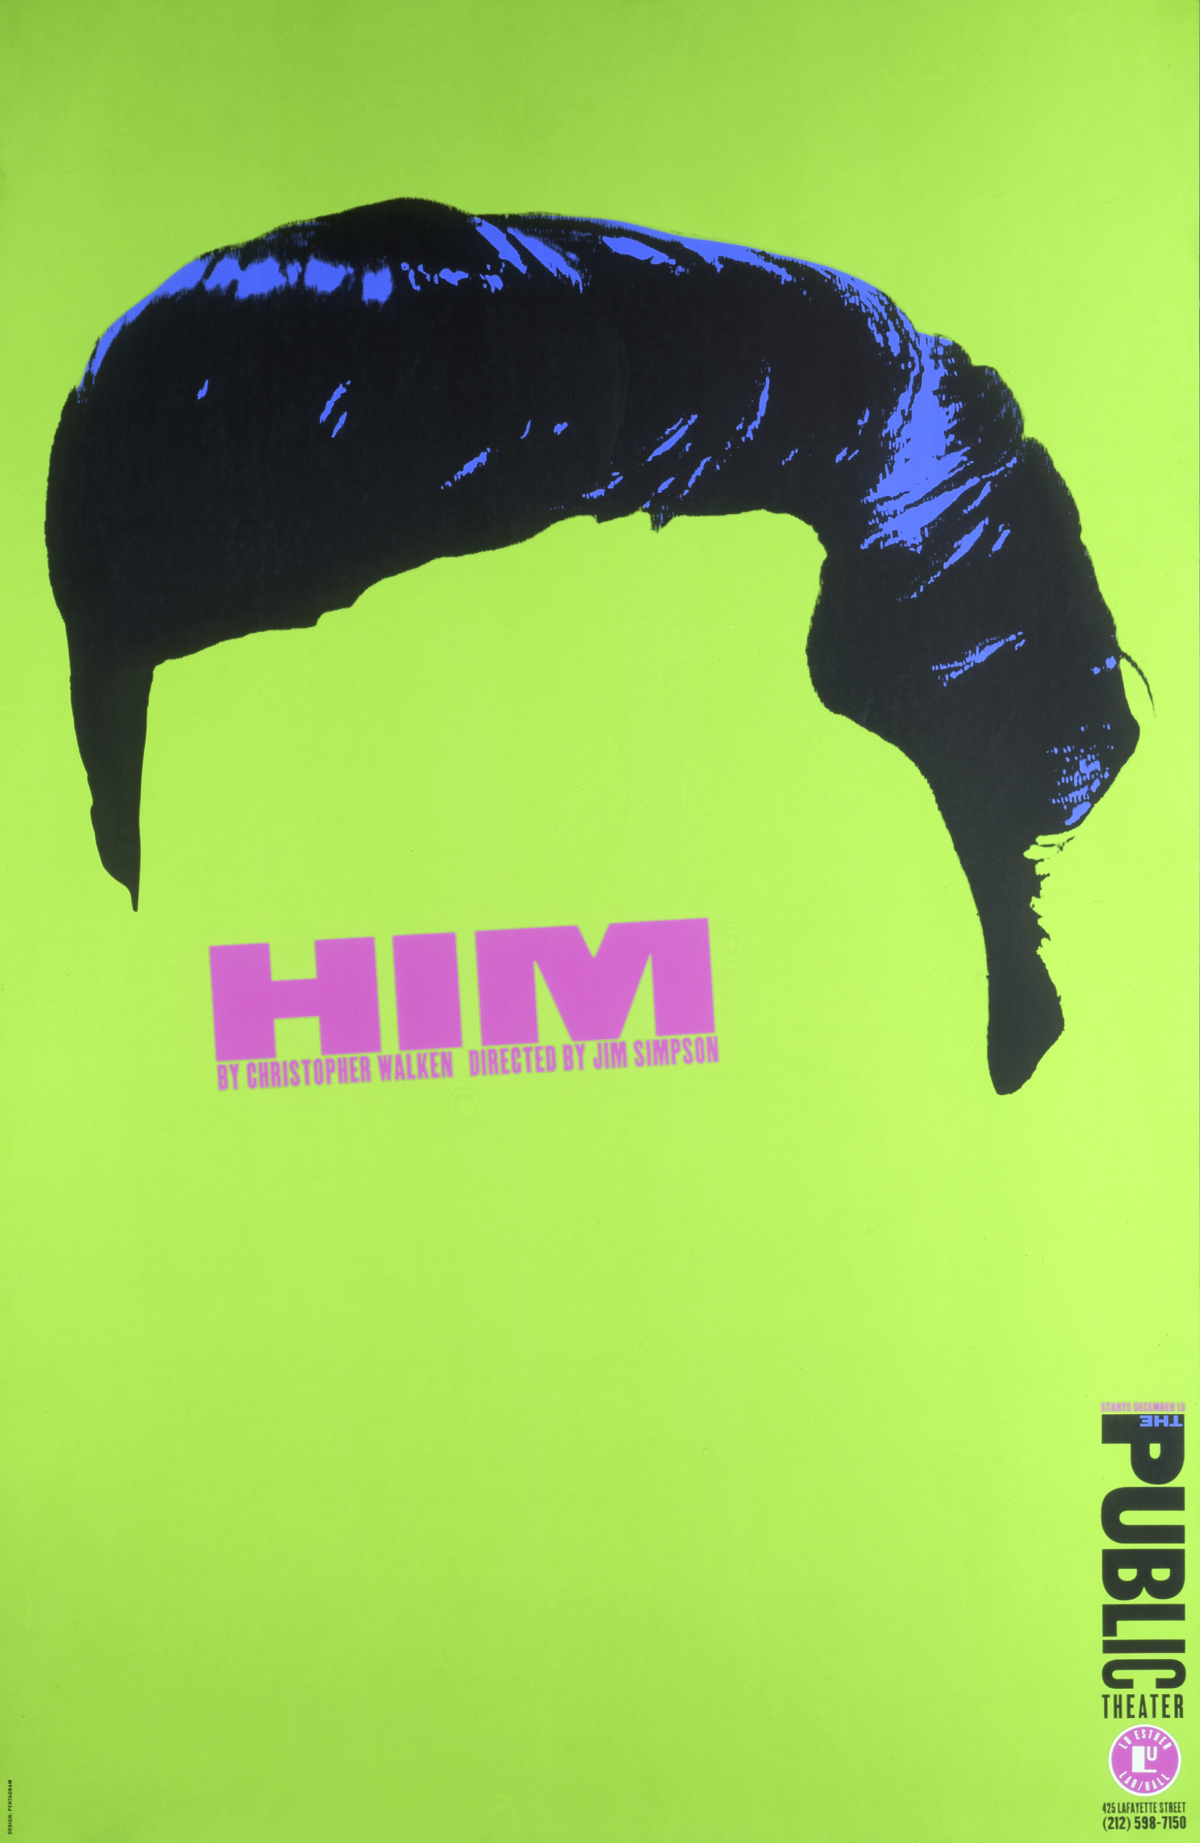 A neon green poster with an illustration of short navy blue hair and pink text.